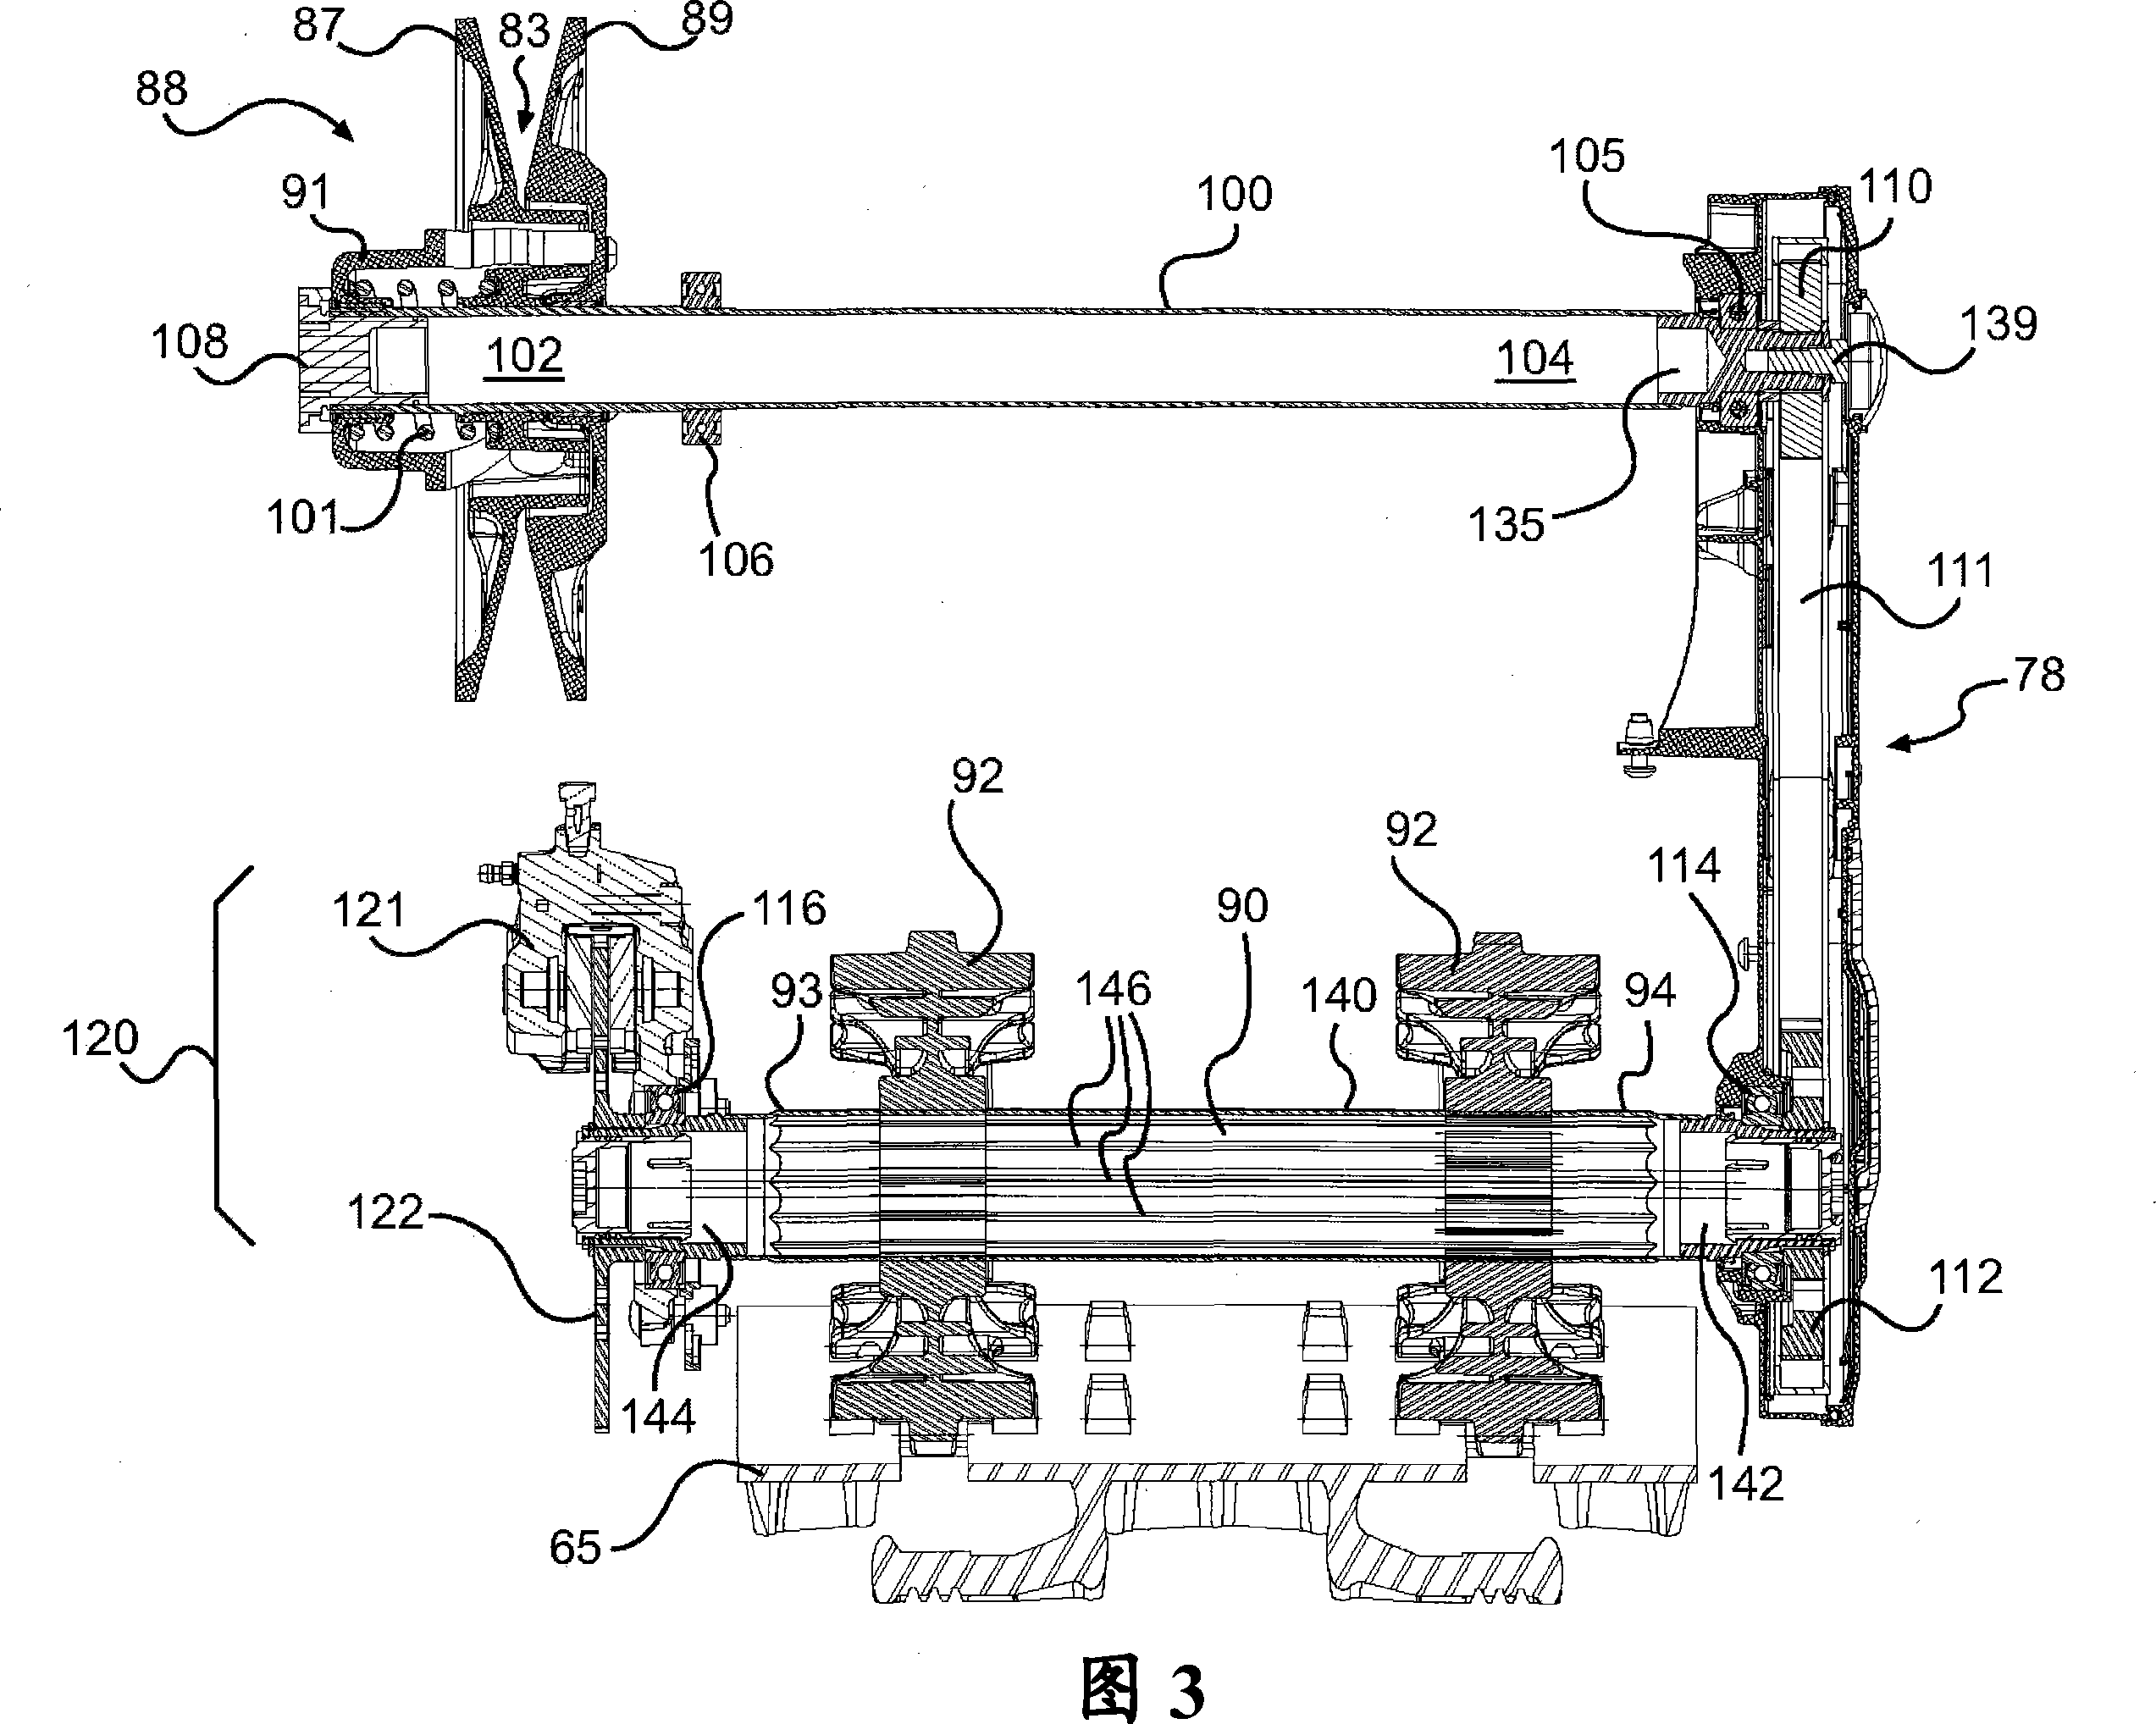 Snowmobile with improved drive train